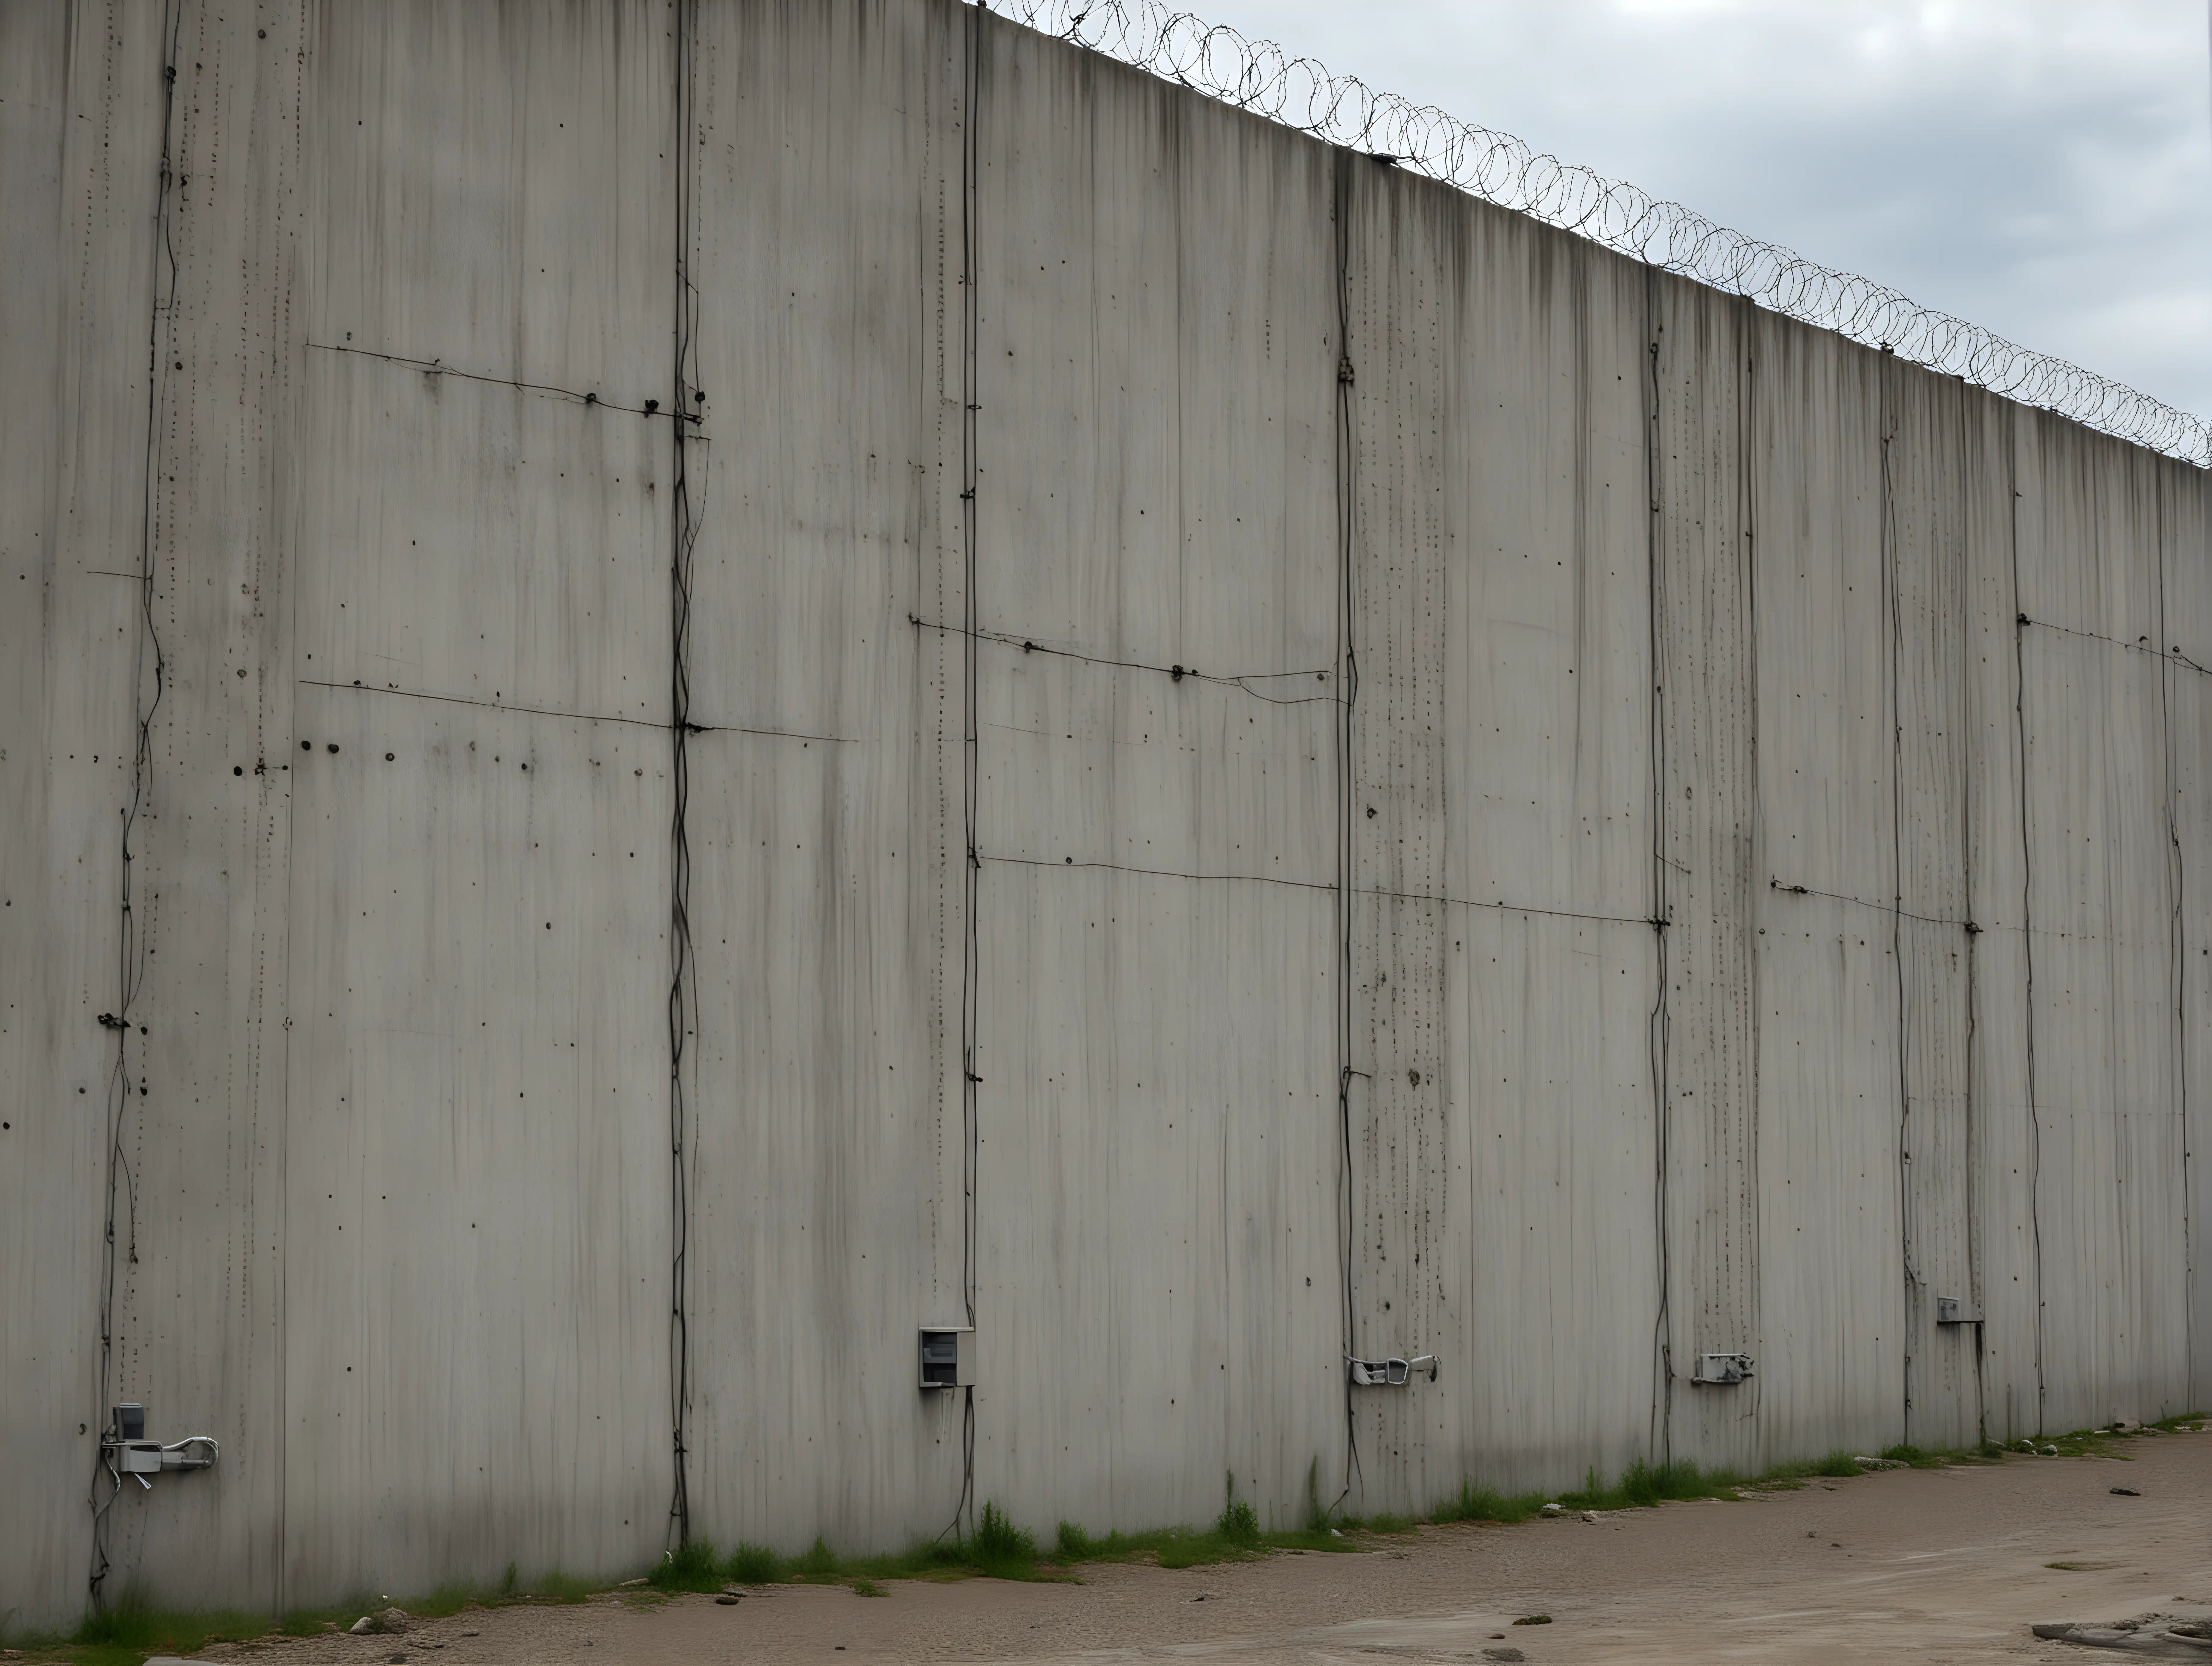 a giant concrete sci-fi wall with electric barbed wire on top

